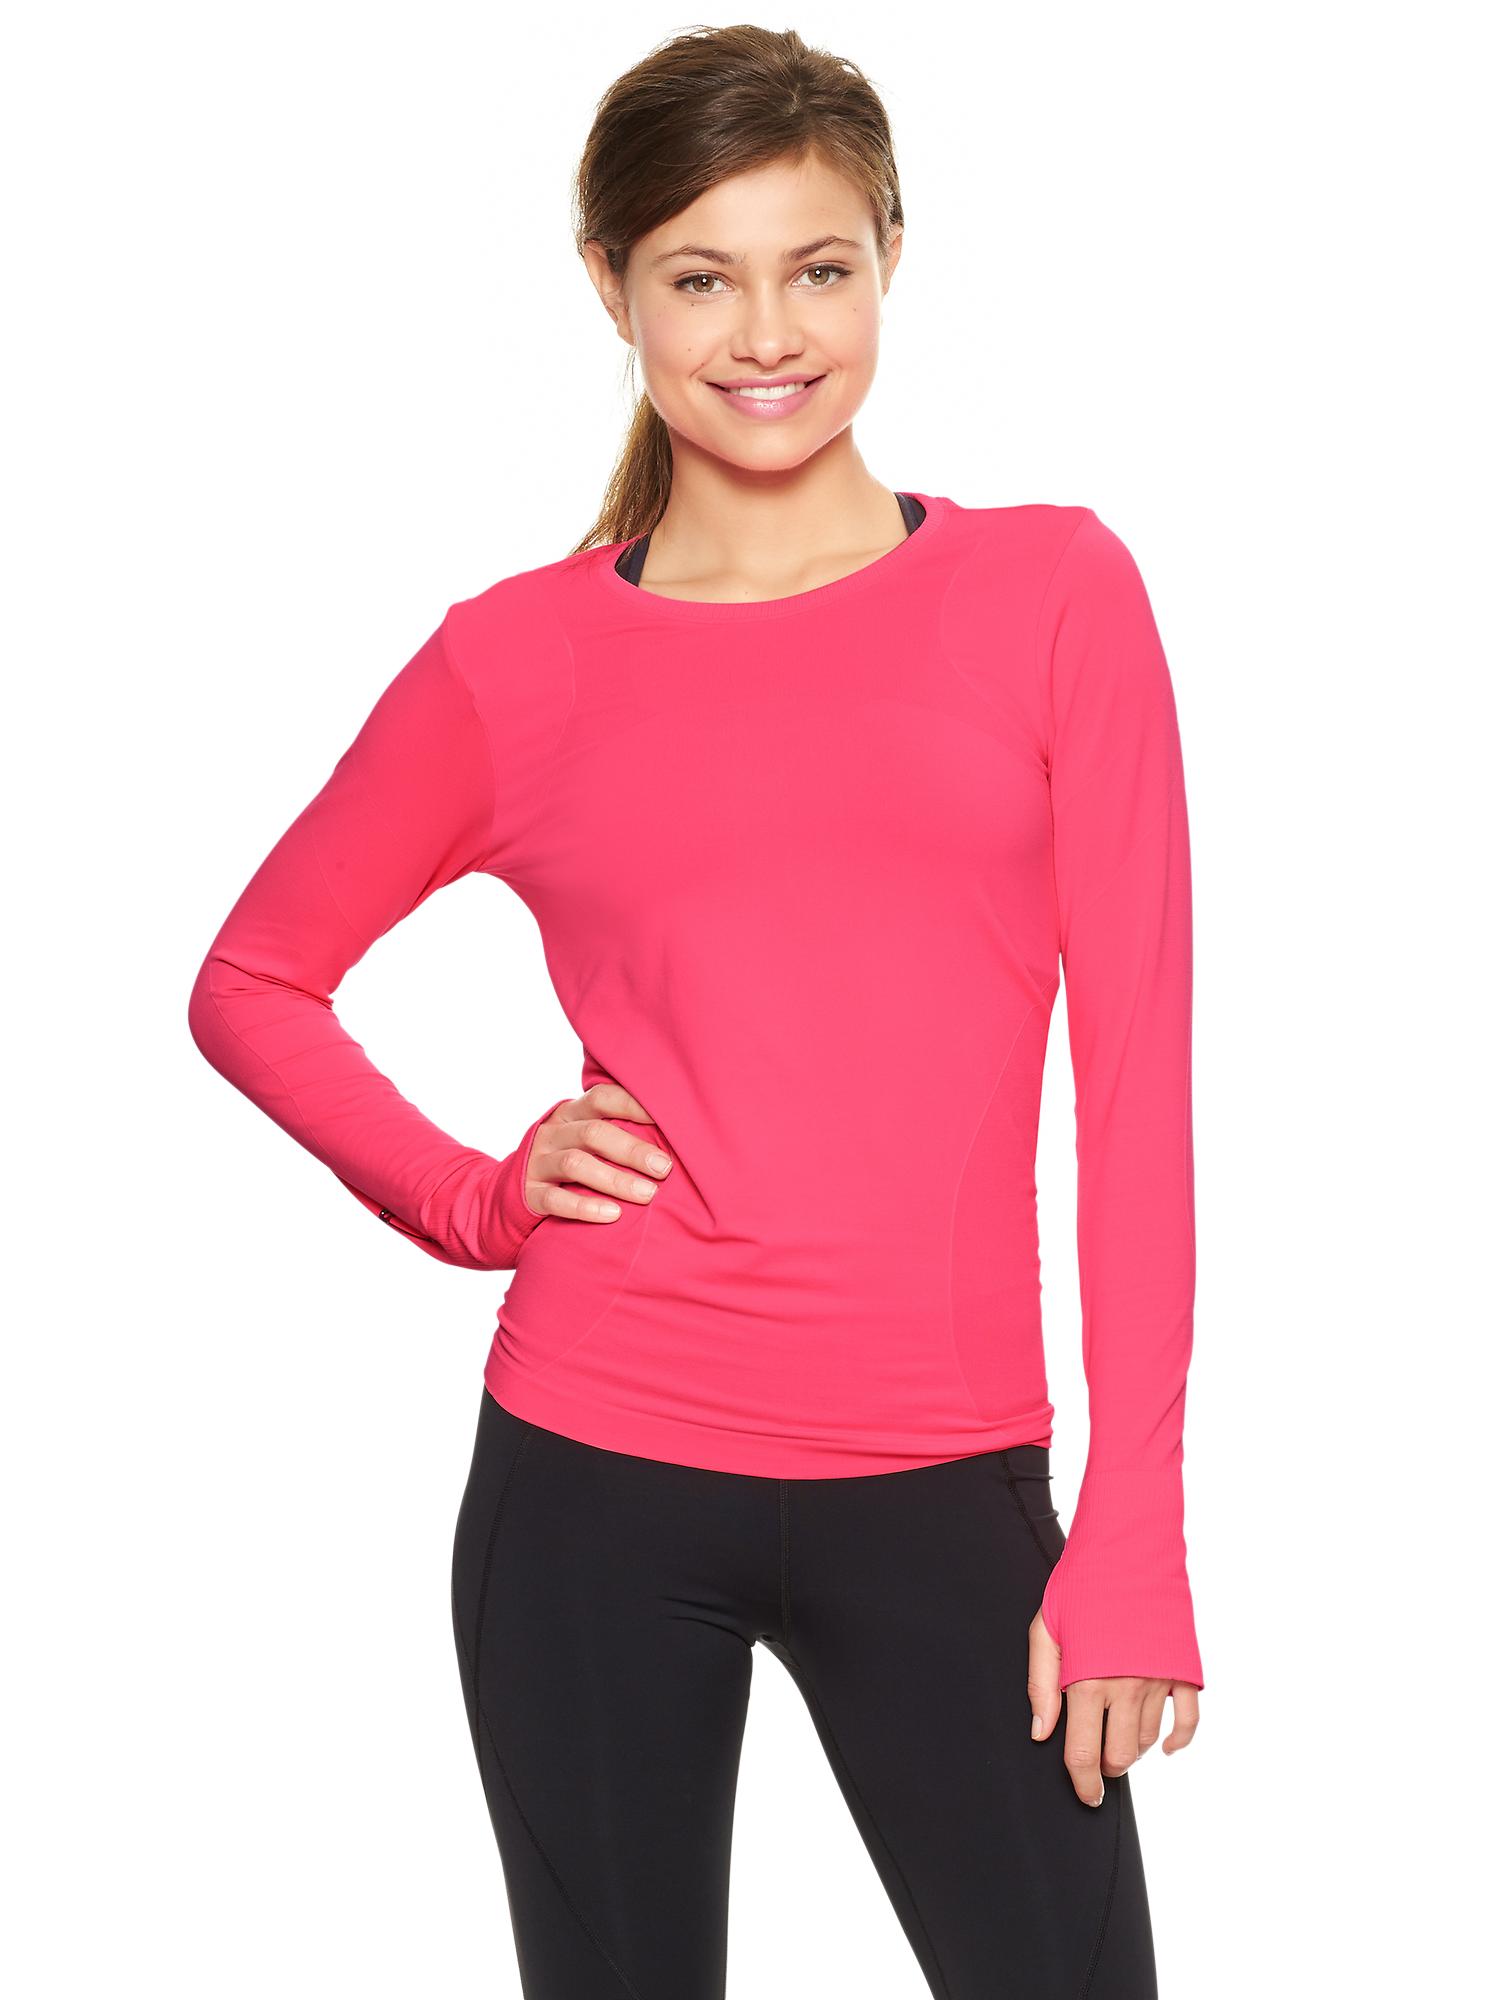 GapFit Motion Long Sleeve Tee Athletic Activewear Workout Comfy Medium -  $20 - From Charelle